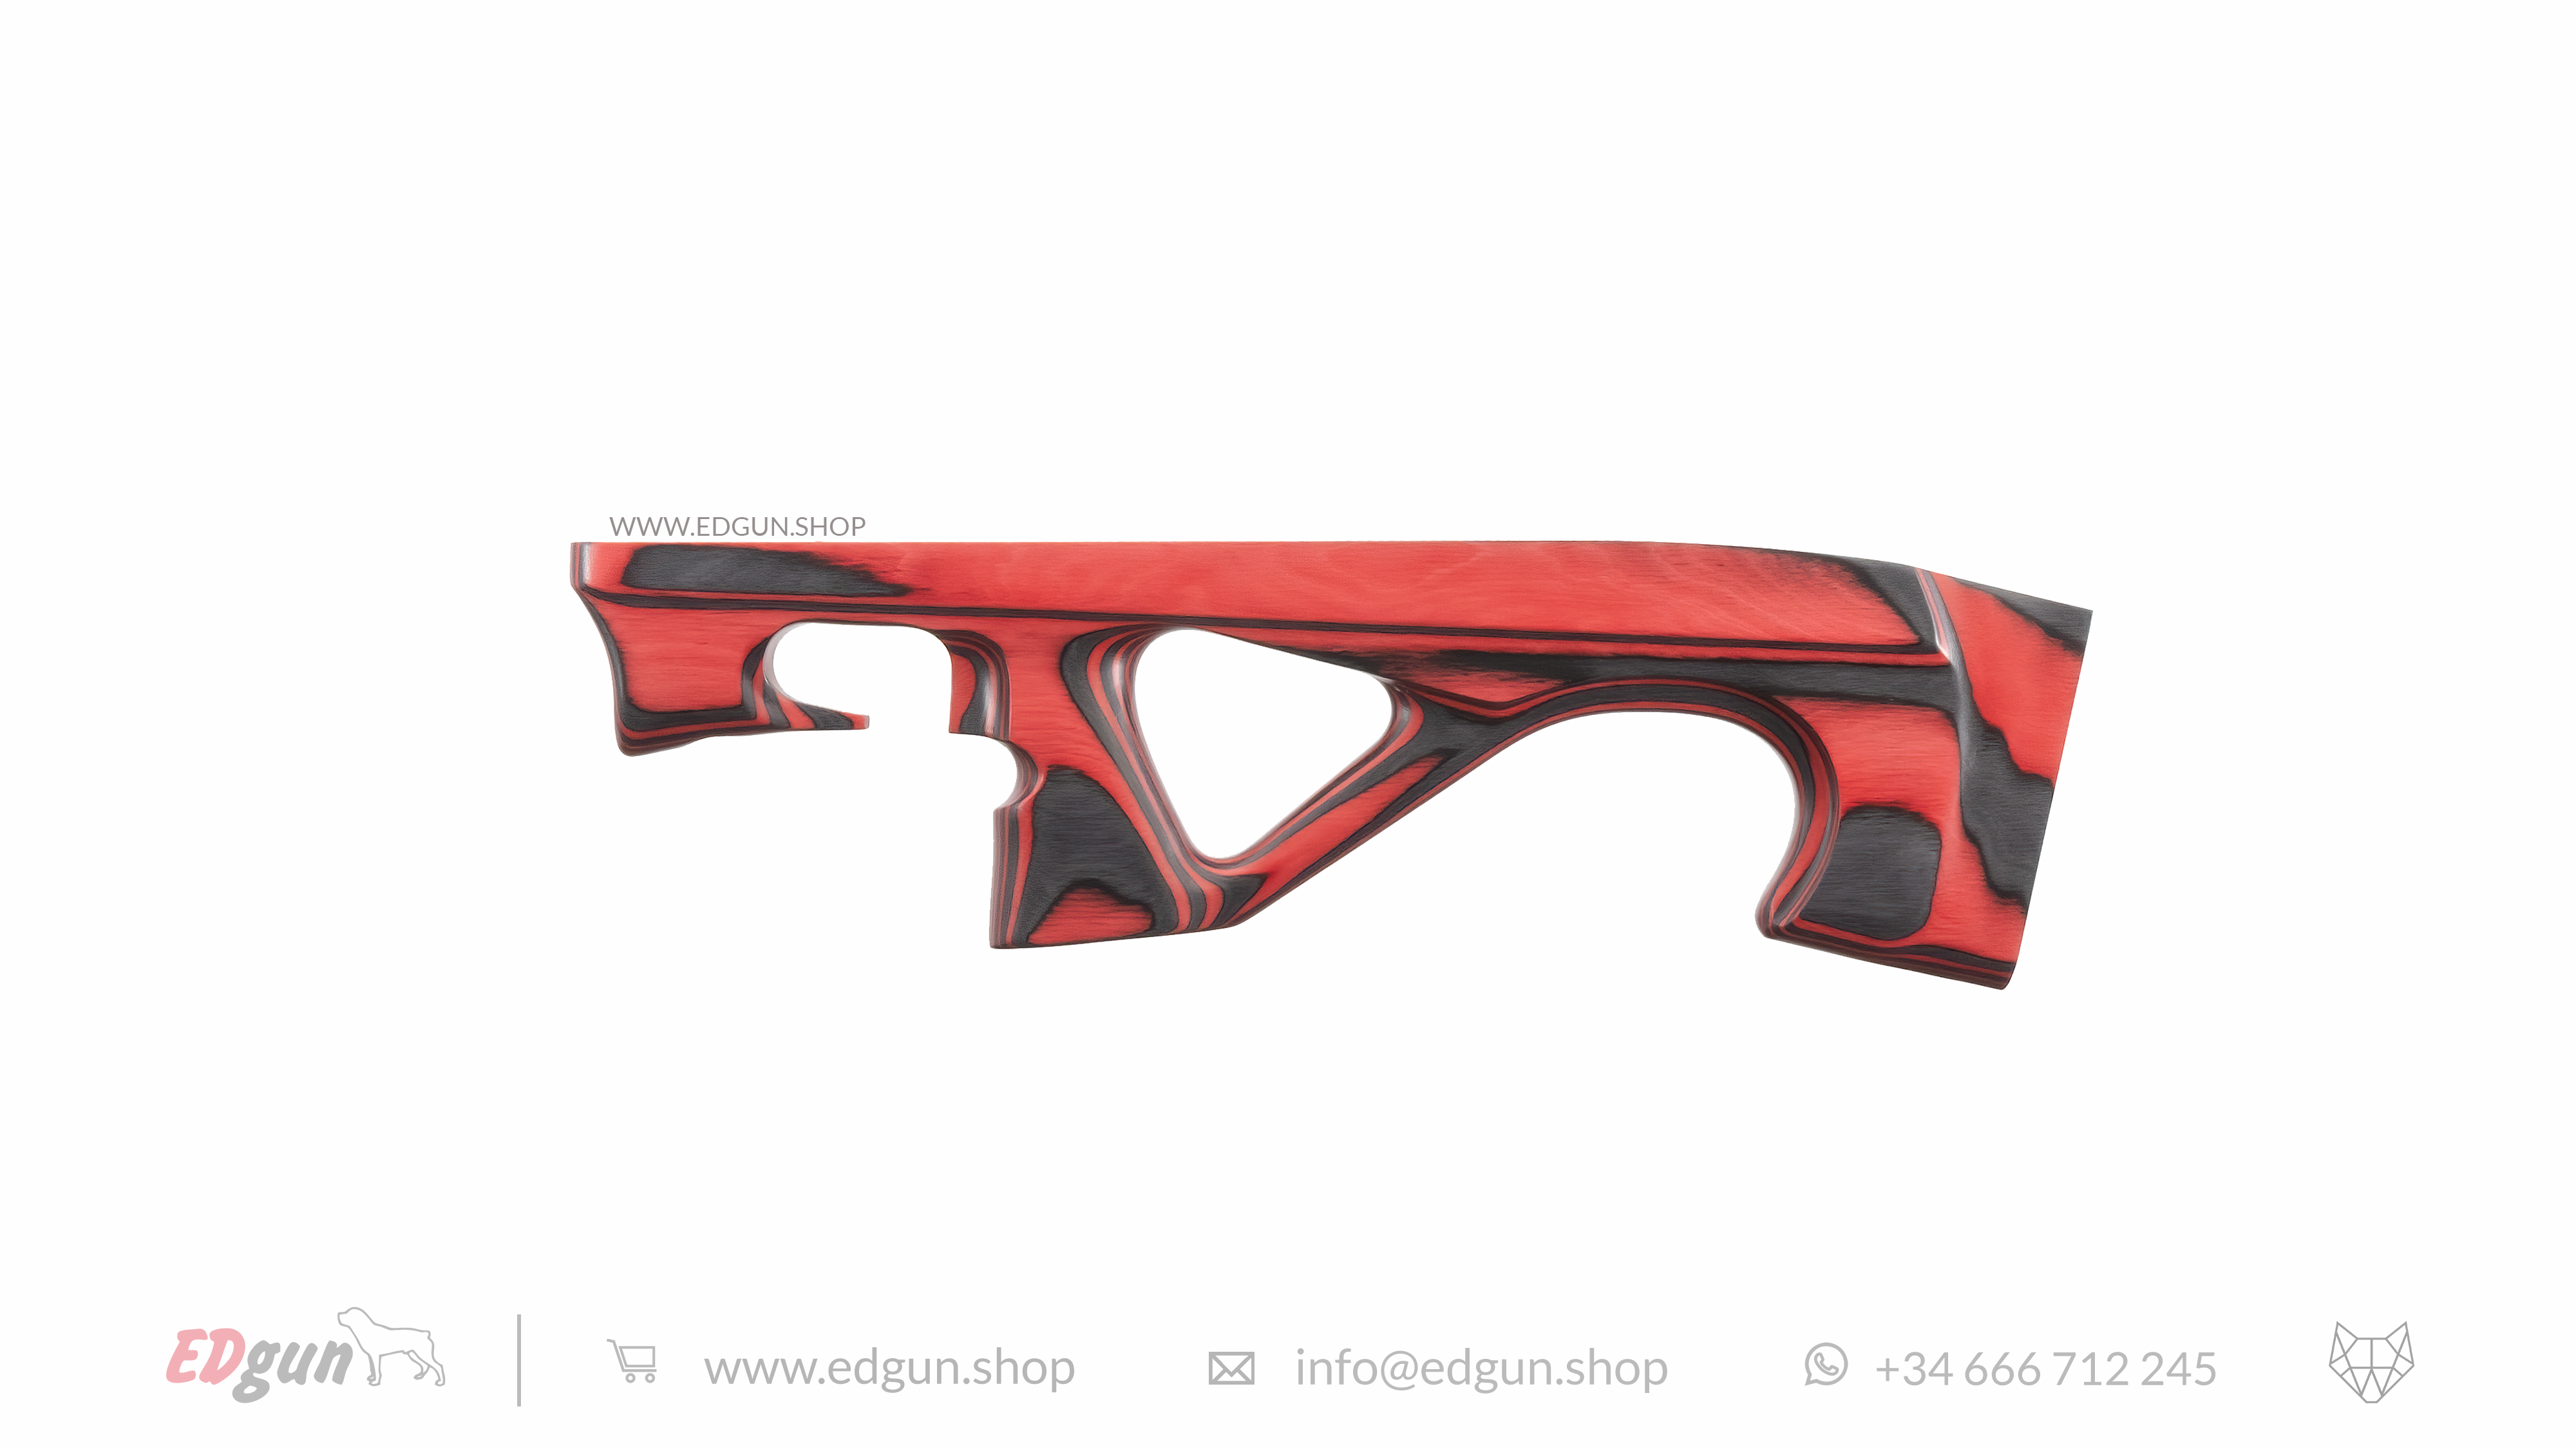 Laminated Stock for Lelya 2.0 in red